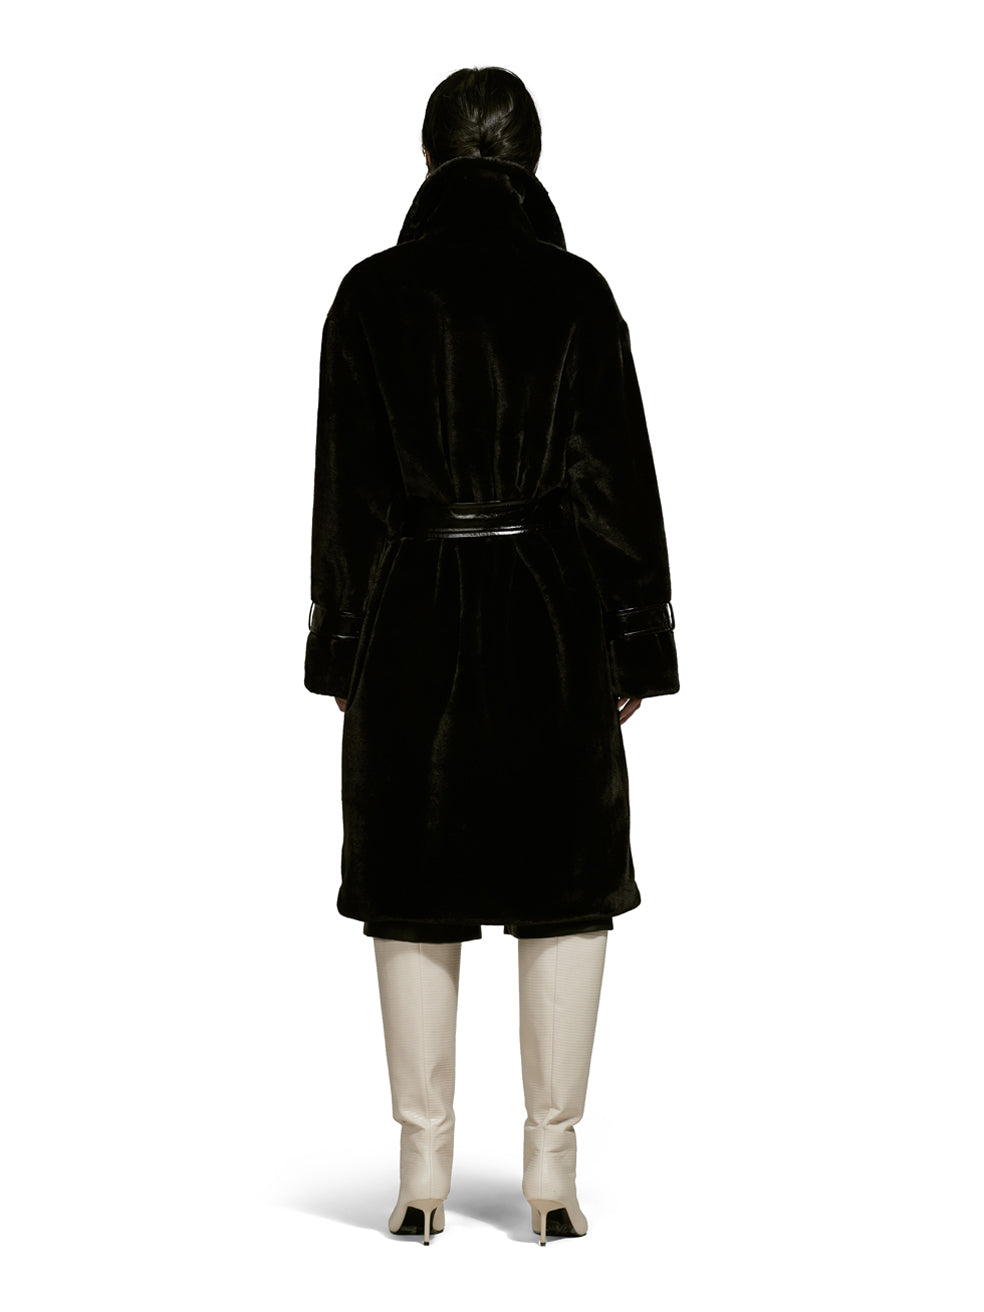 Violet Black Long Coat Outerwear Made in Canada Zero Waste Fashion Animal-Free Fur and Leather Details